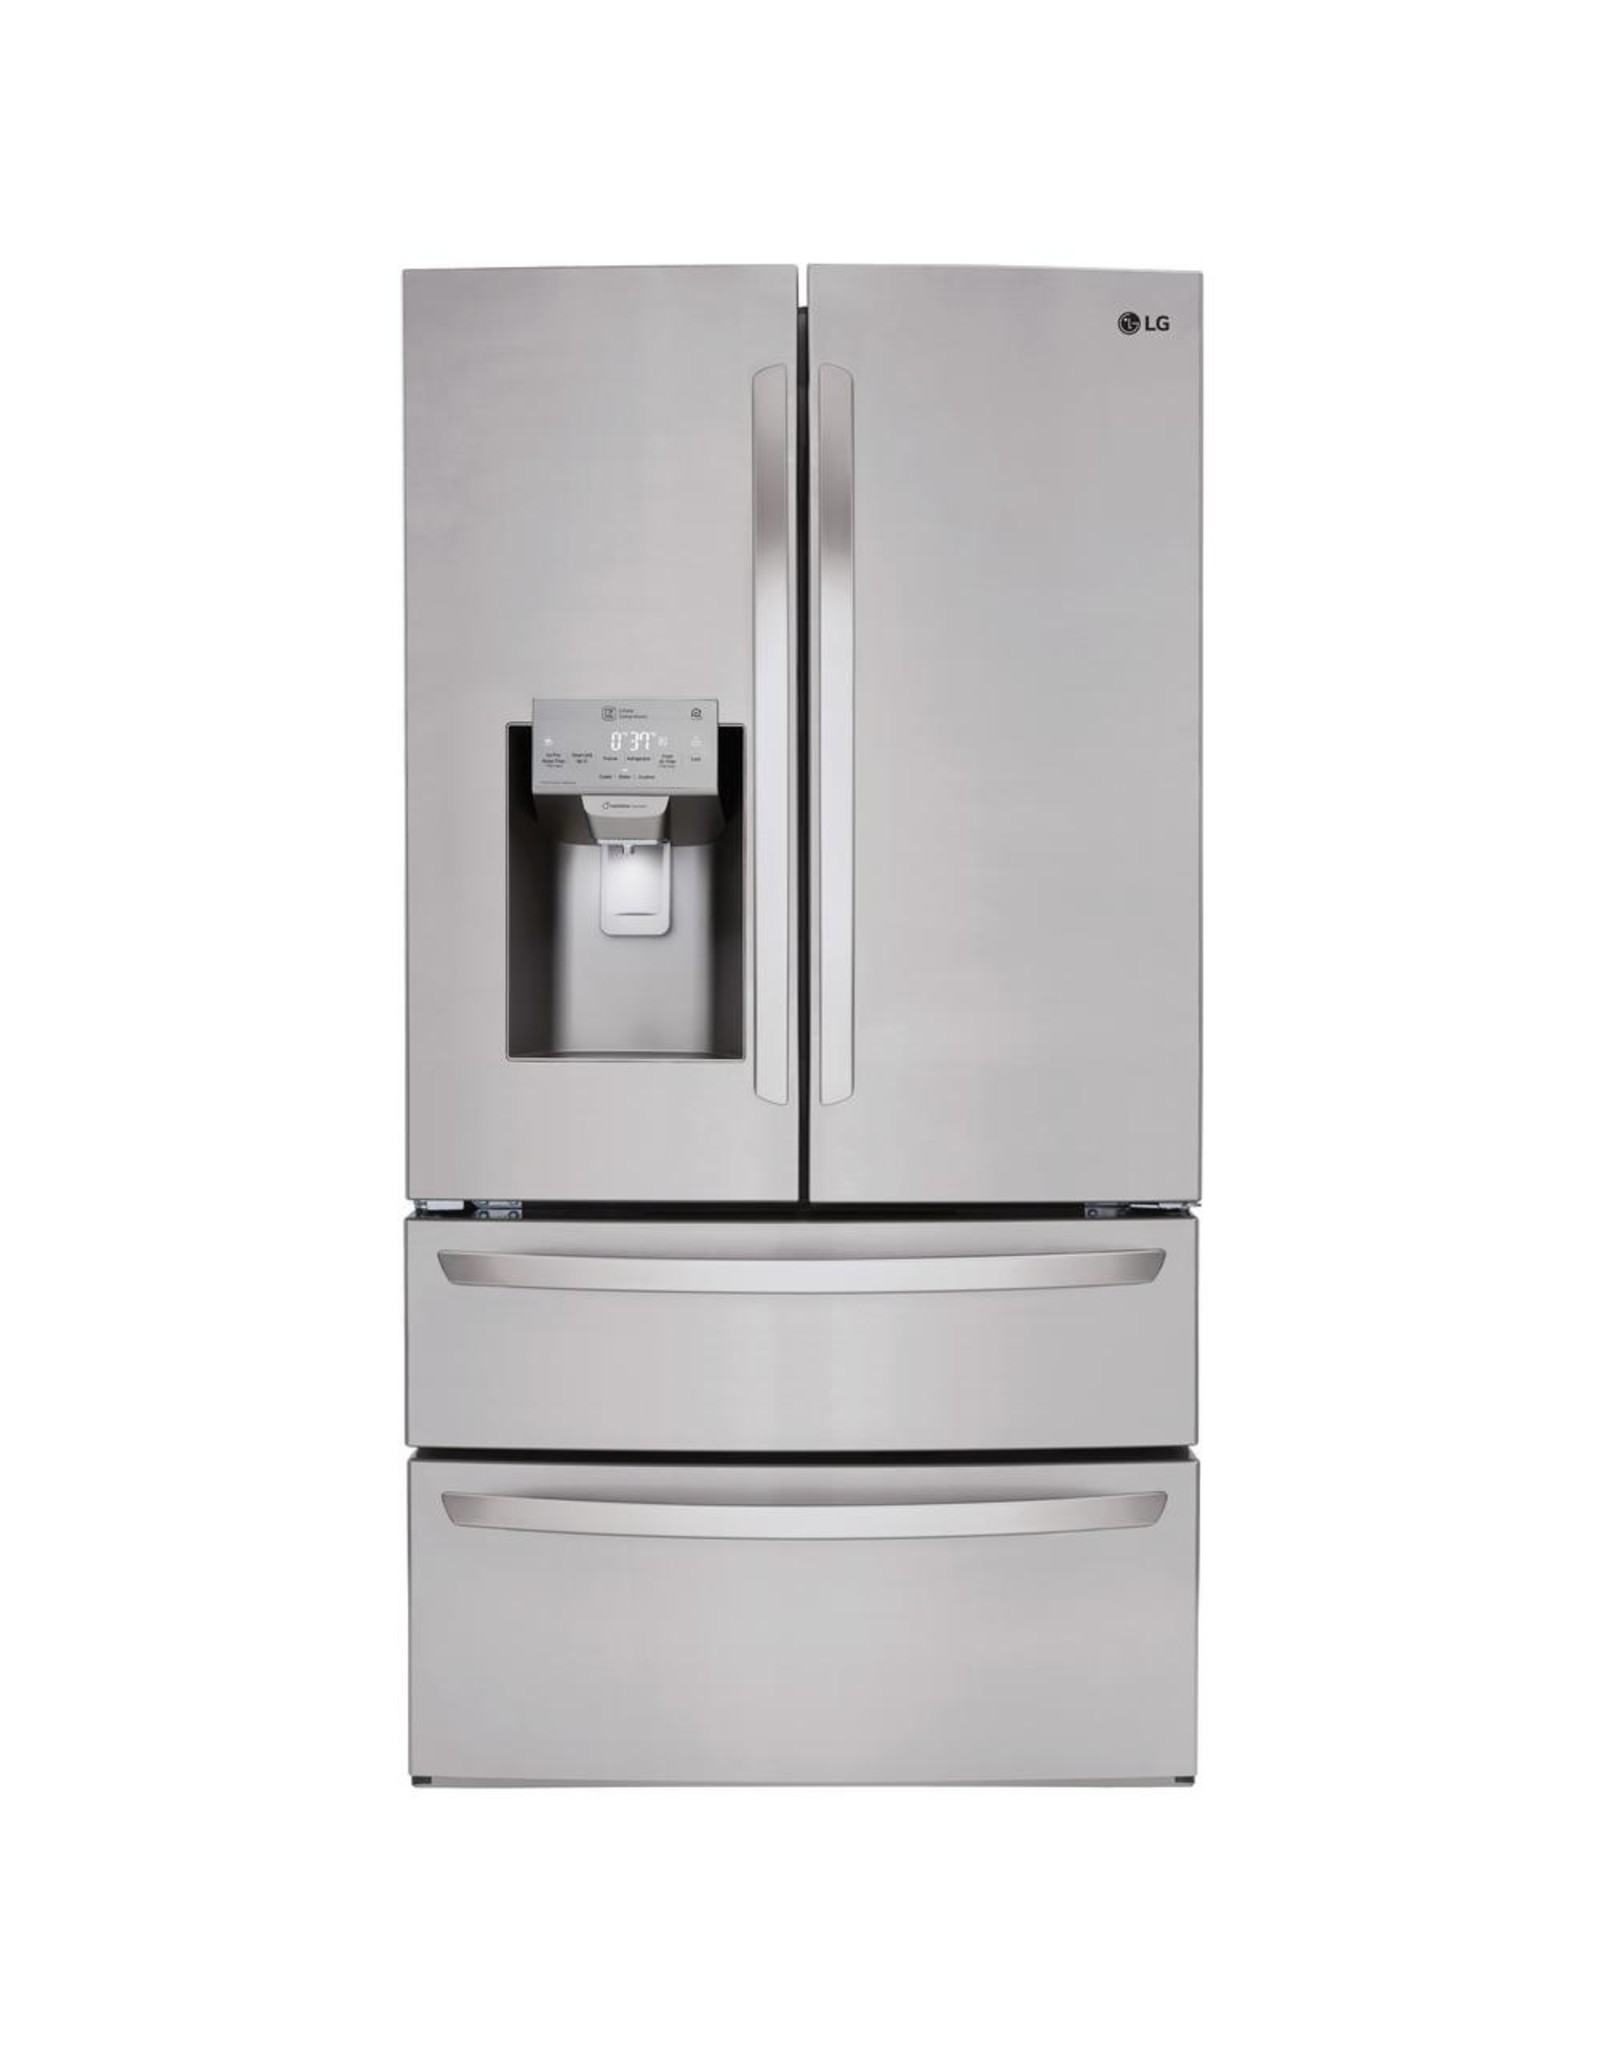 LG Electronics NEW LMXS28626S 27.8 cu. ft. 4 Door French Door Smart Refrigerator with 2 Freezer Drawers and Wi-Fi Enabled in Stainless Steel